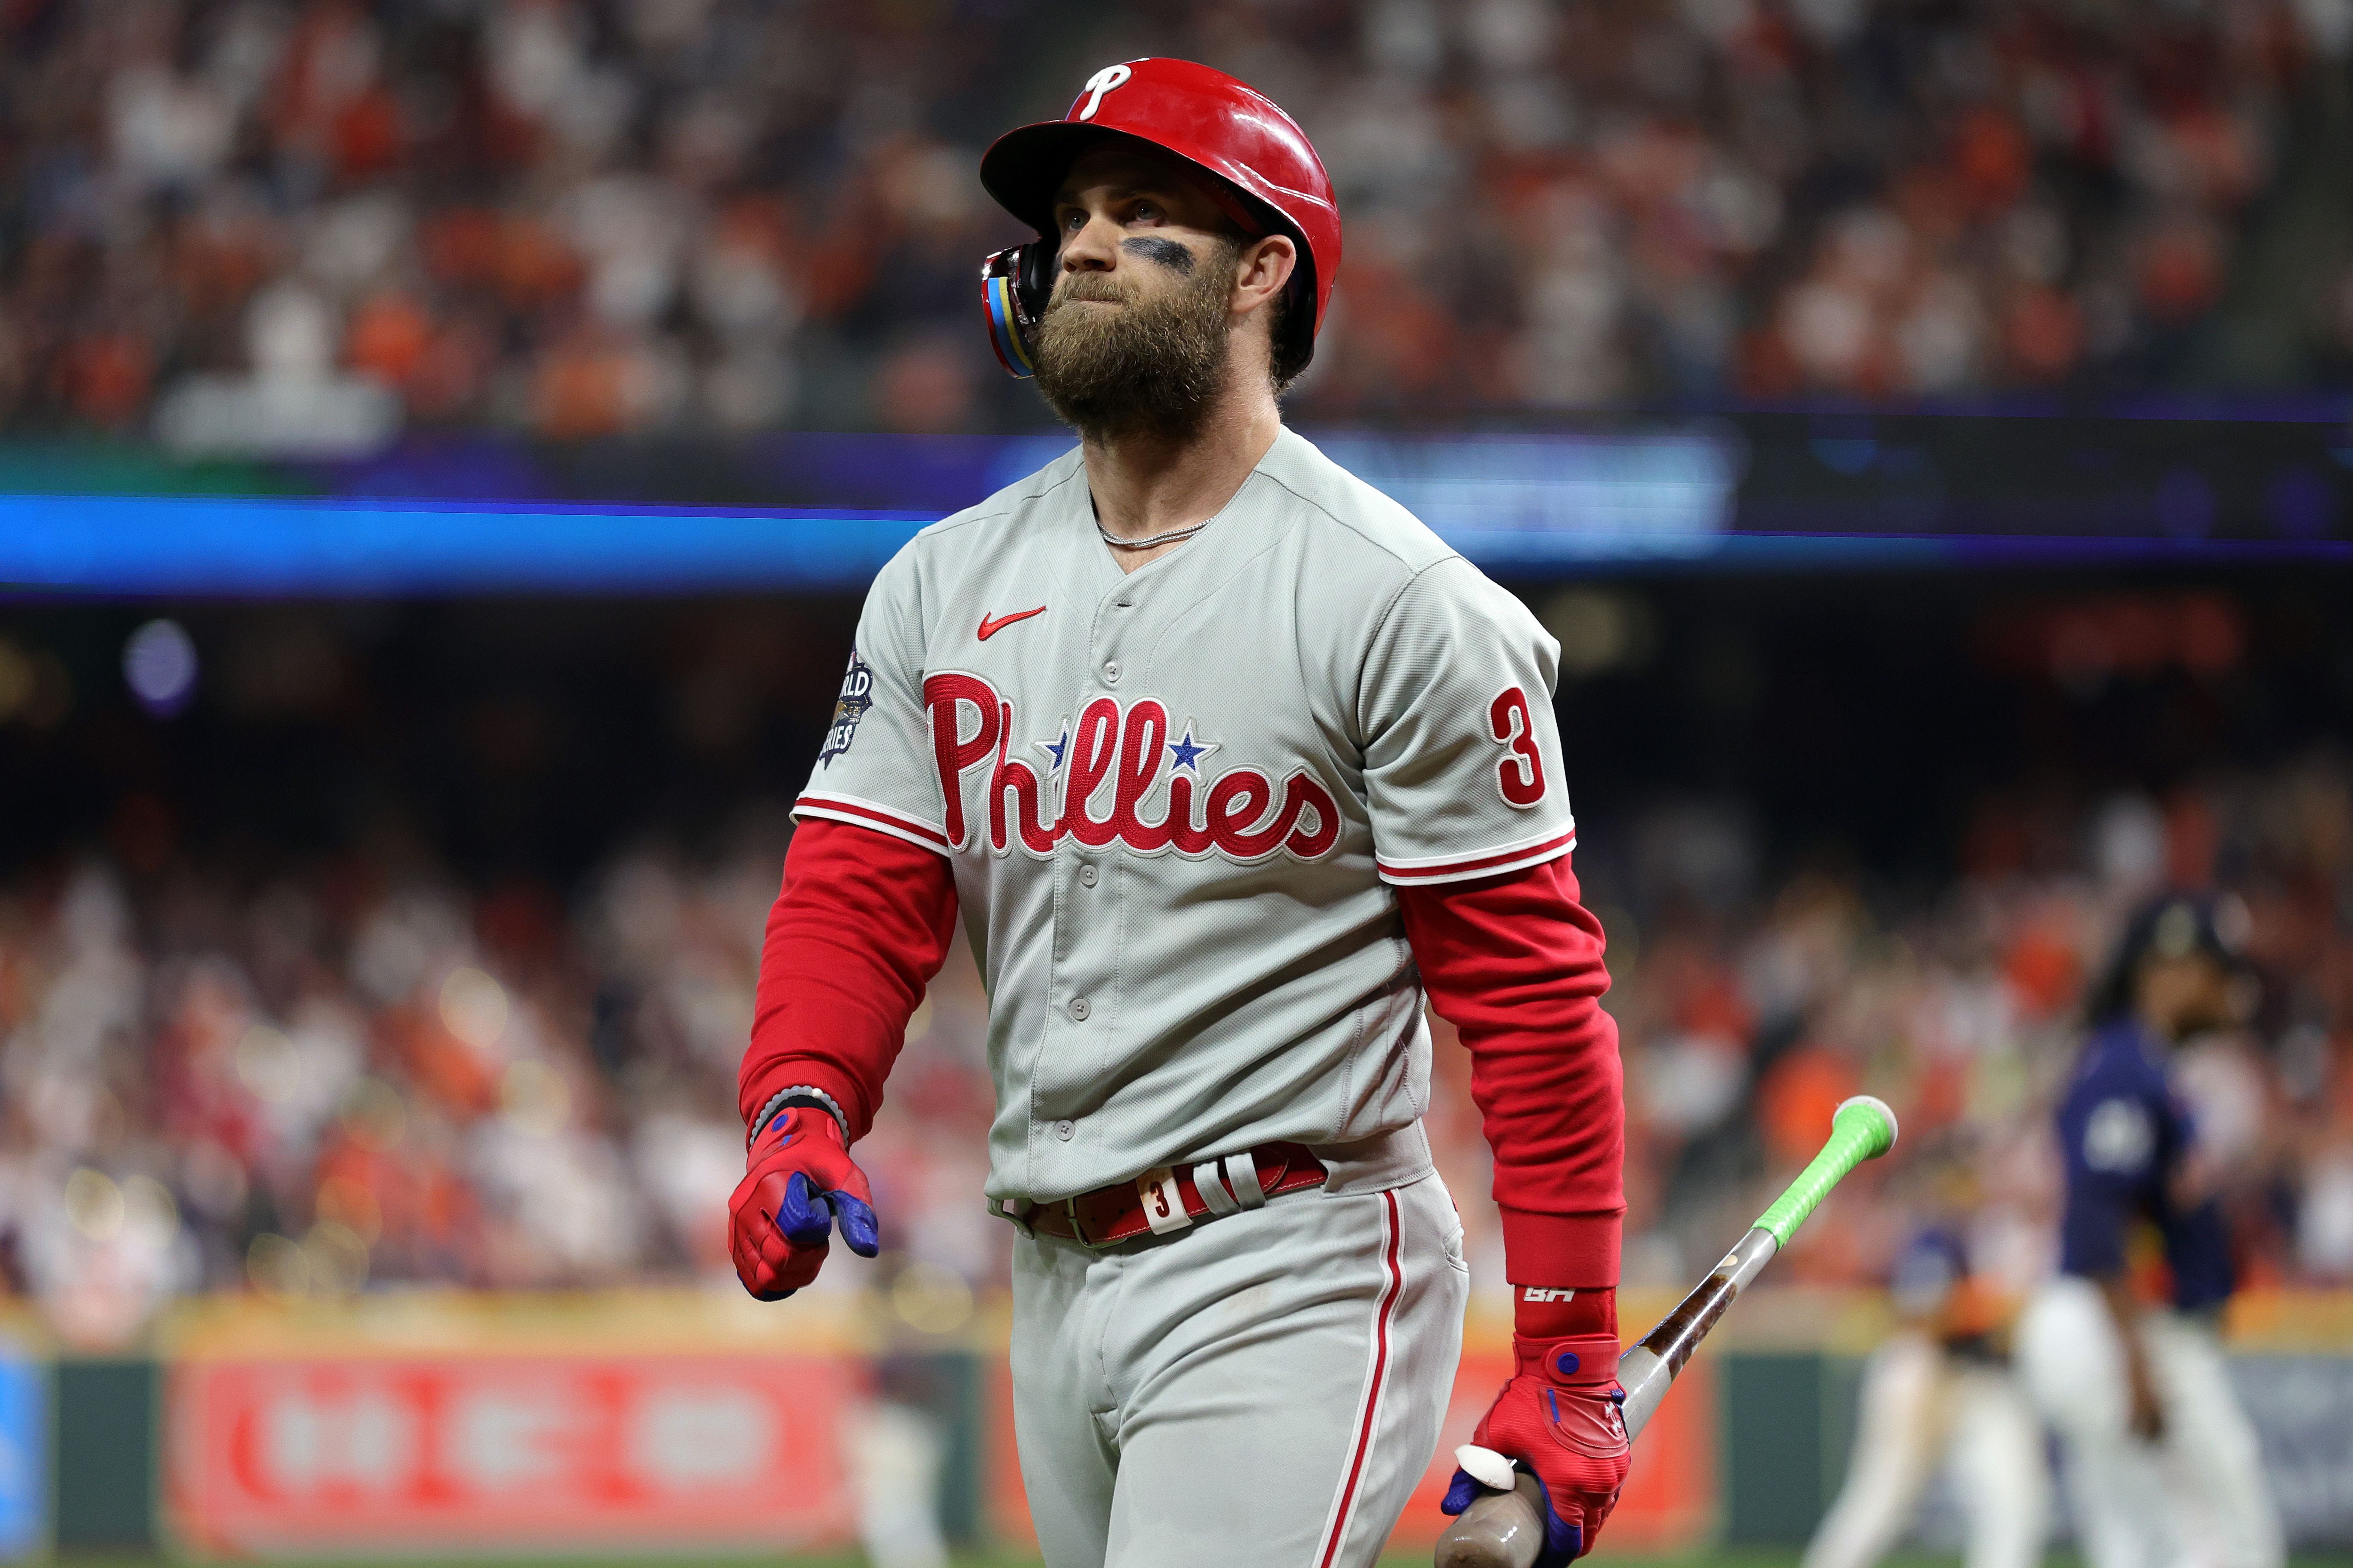 Bryce Harper #3 of the Philadelphia Phillies reacts after striking out against the Houston Astros during the sixth inning in Game Six of the 2022 World Series at Minute Maid Park on November 05, 2022 in Houston, Texas.